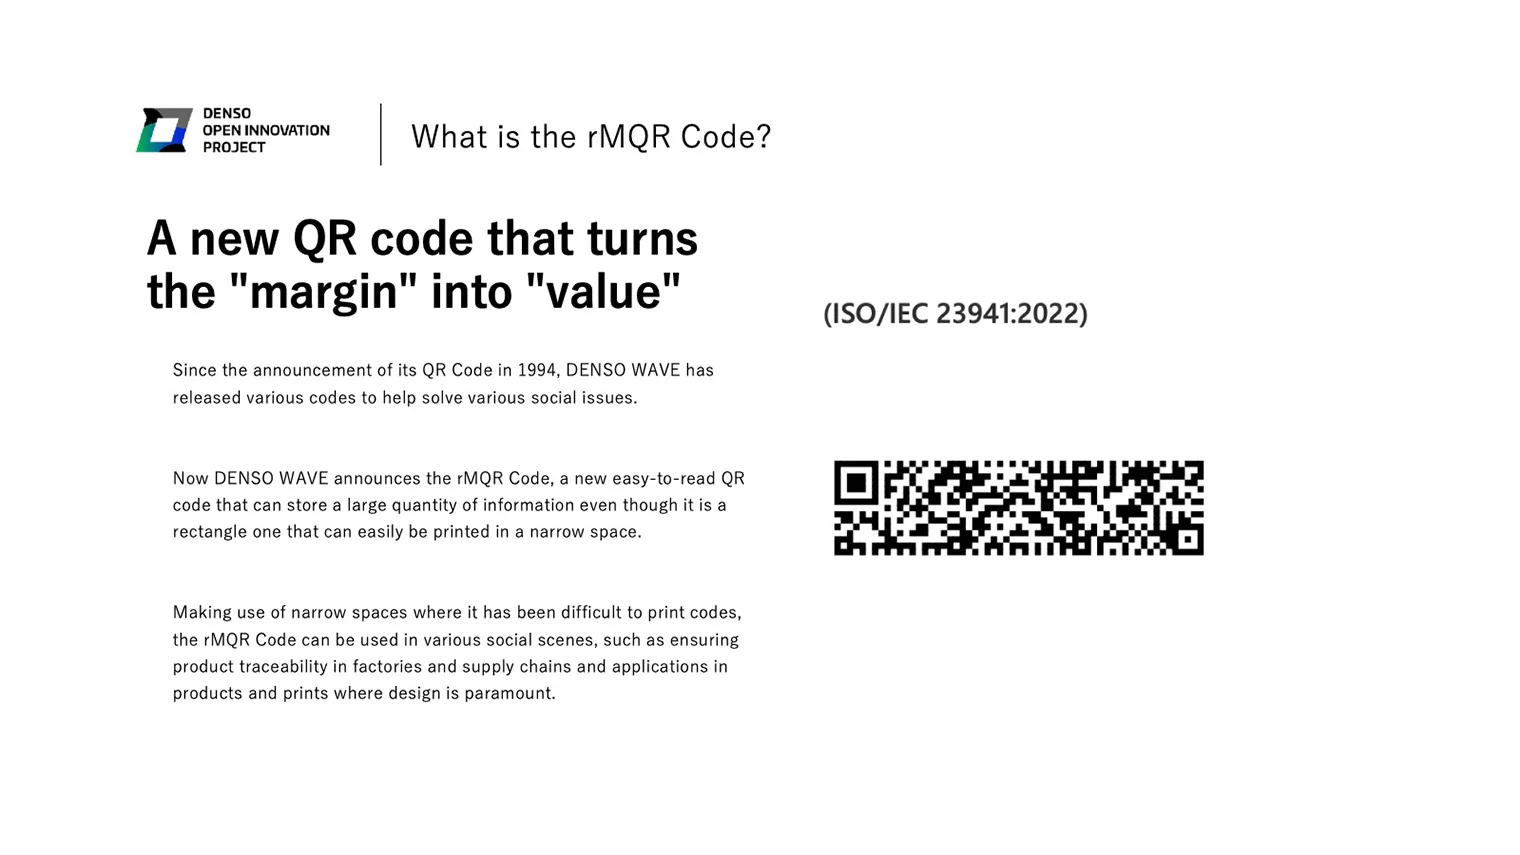 What is the rMQR Code? A new QR code that turns the &quot;margin&quot; into &quot;value&quot; Since the announcement of its QR Code in 1994, DENSO WAVE has released various codes to help solve various social issues. Now DENSO WAVE announces the rMQR Code, a new easy-to-read QR code that can store a large quantity of information even though it is a rectangle one that can easily be printed in a narrow space. Making use of narrow spaces where it has been difficult to print codes, the rMQR Code can be used in various social scenes, such as ensuring product traceability in factories and supply chains and applications in products and prints where design is paramount.（ISO/IEC 23941:2022）